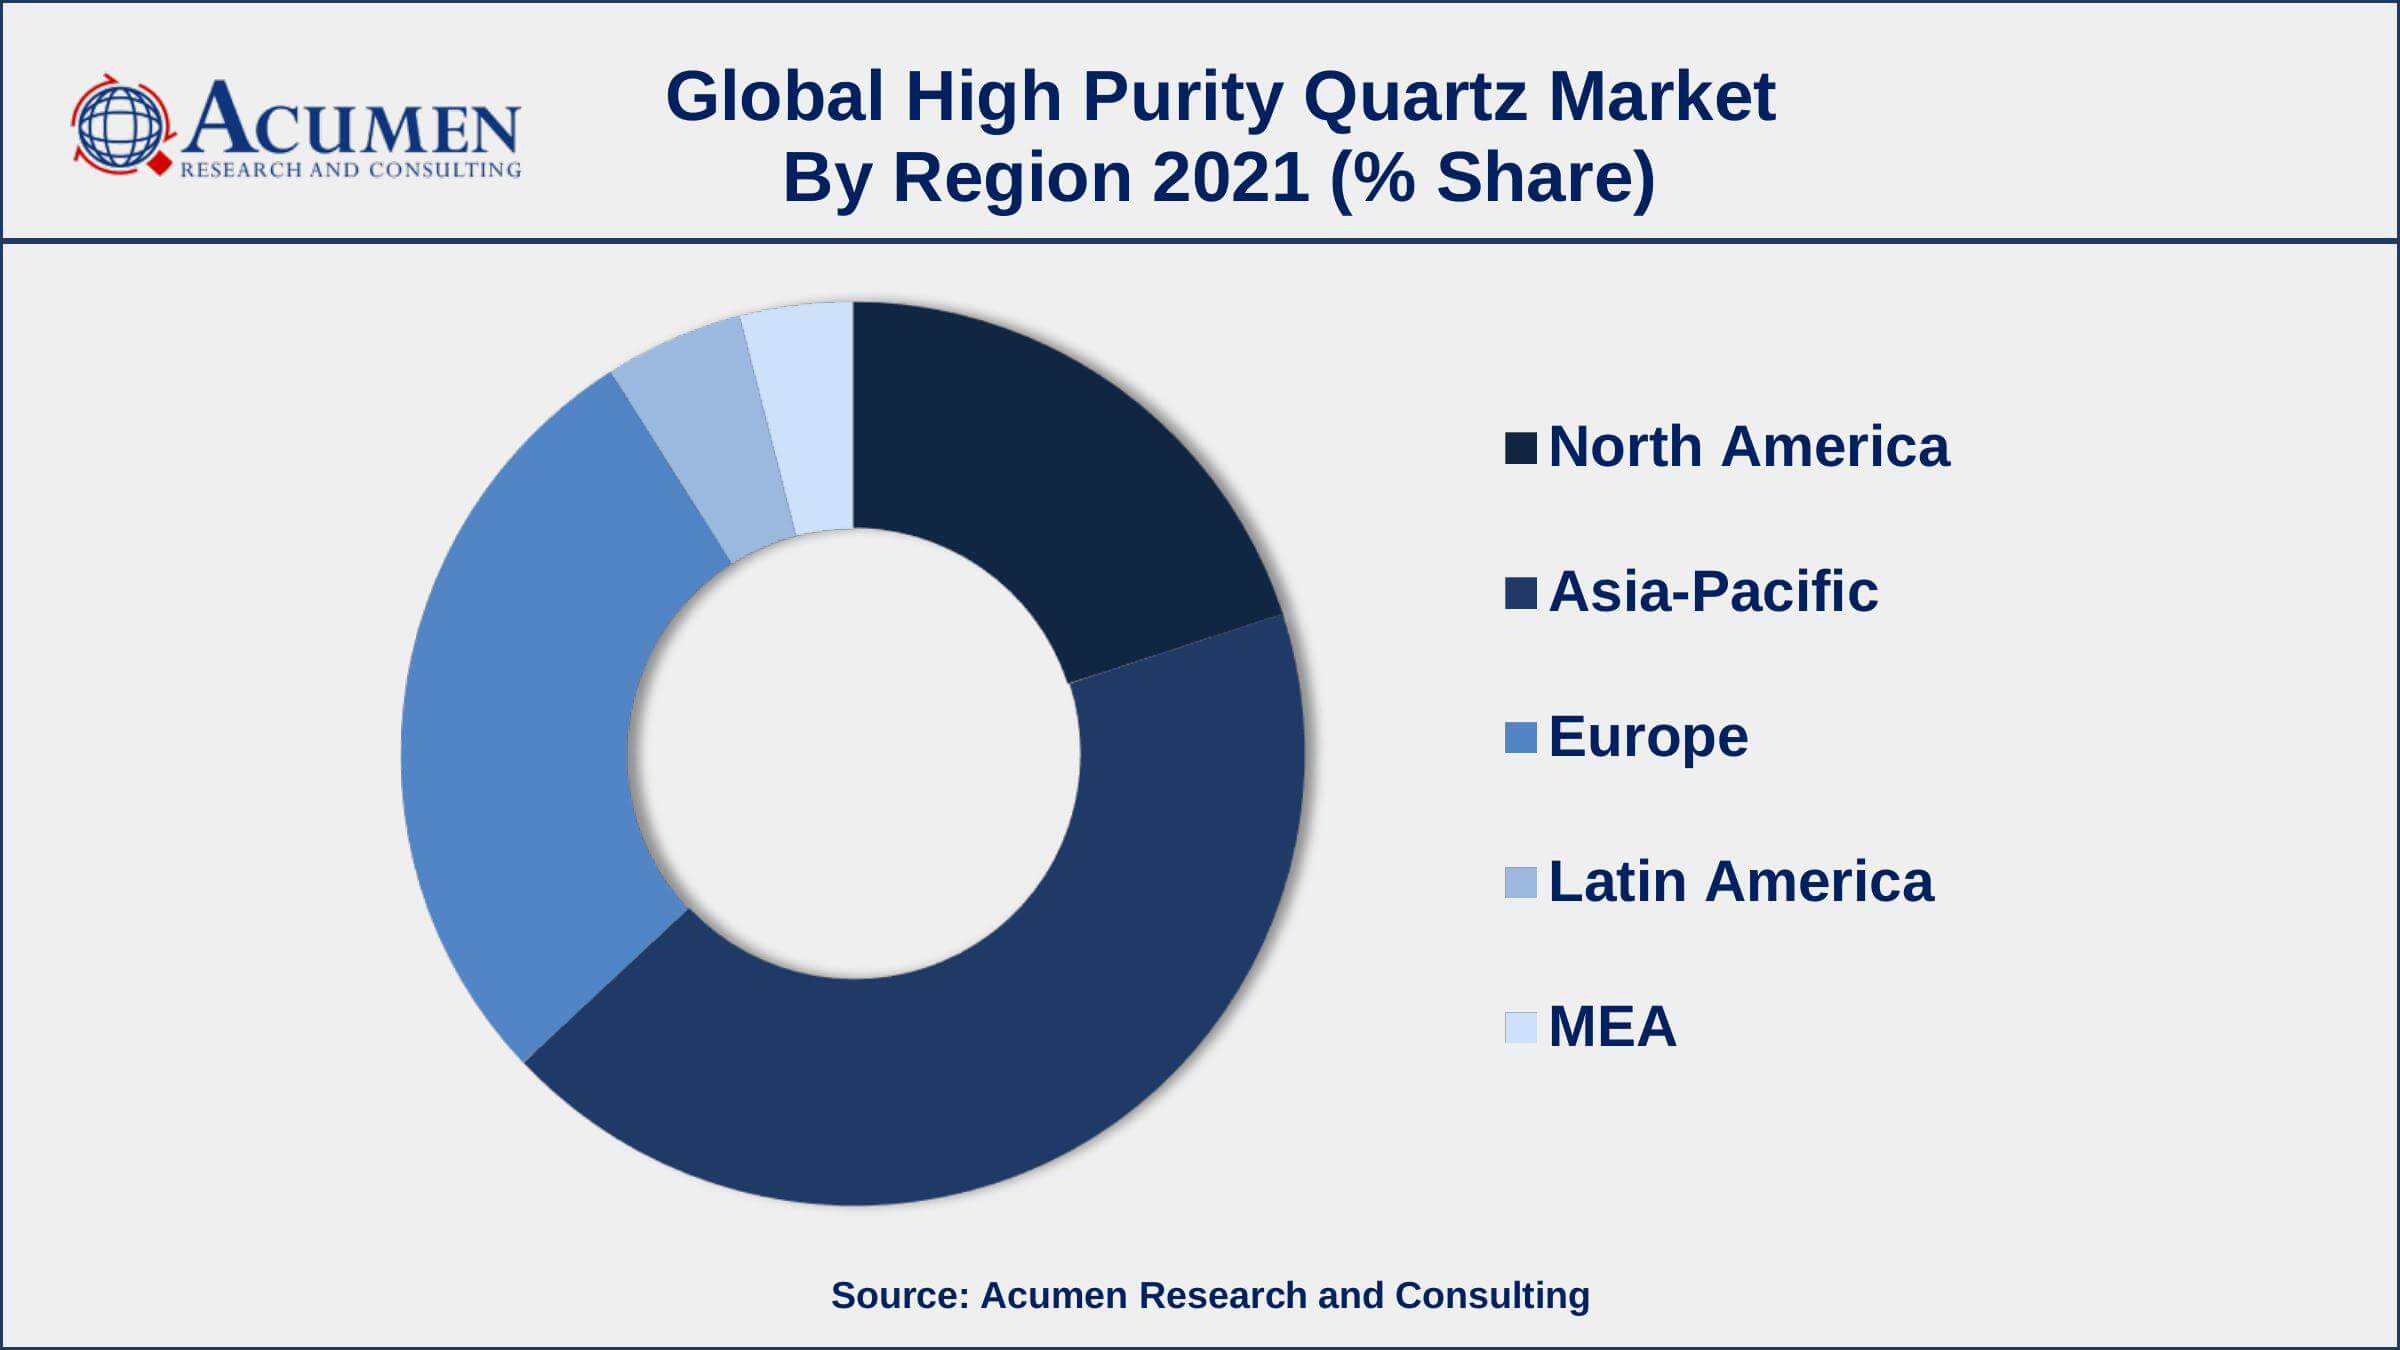 Increasing demand from the health-conscious population, drives the high purity quartz market size